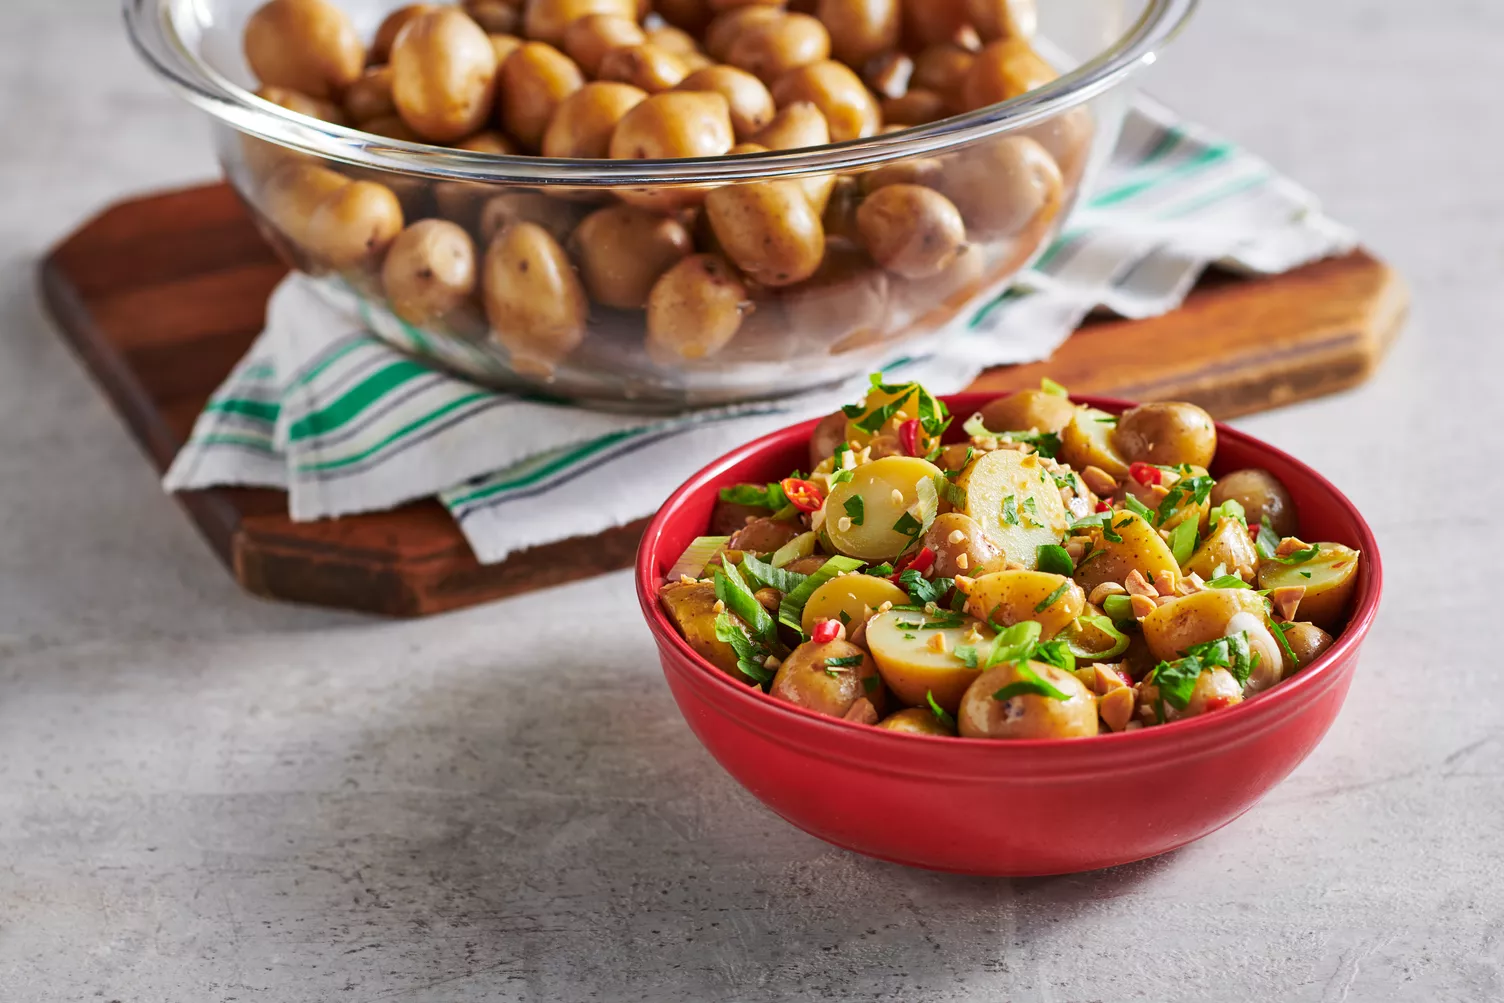 A spicy potato salad with Thai chilies